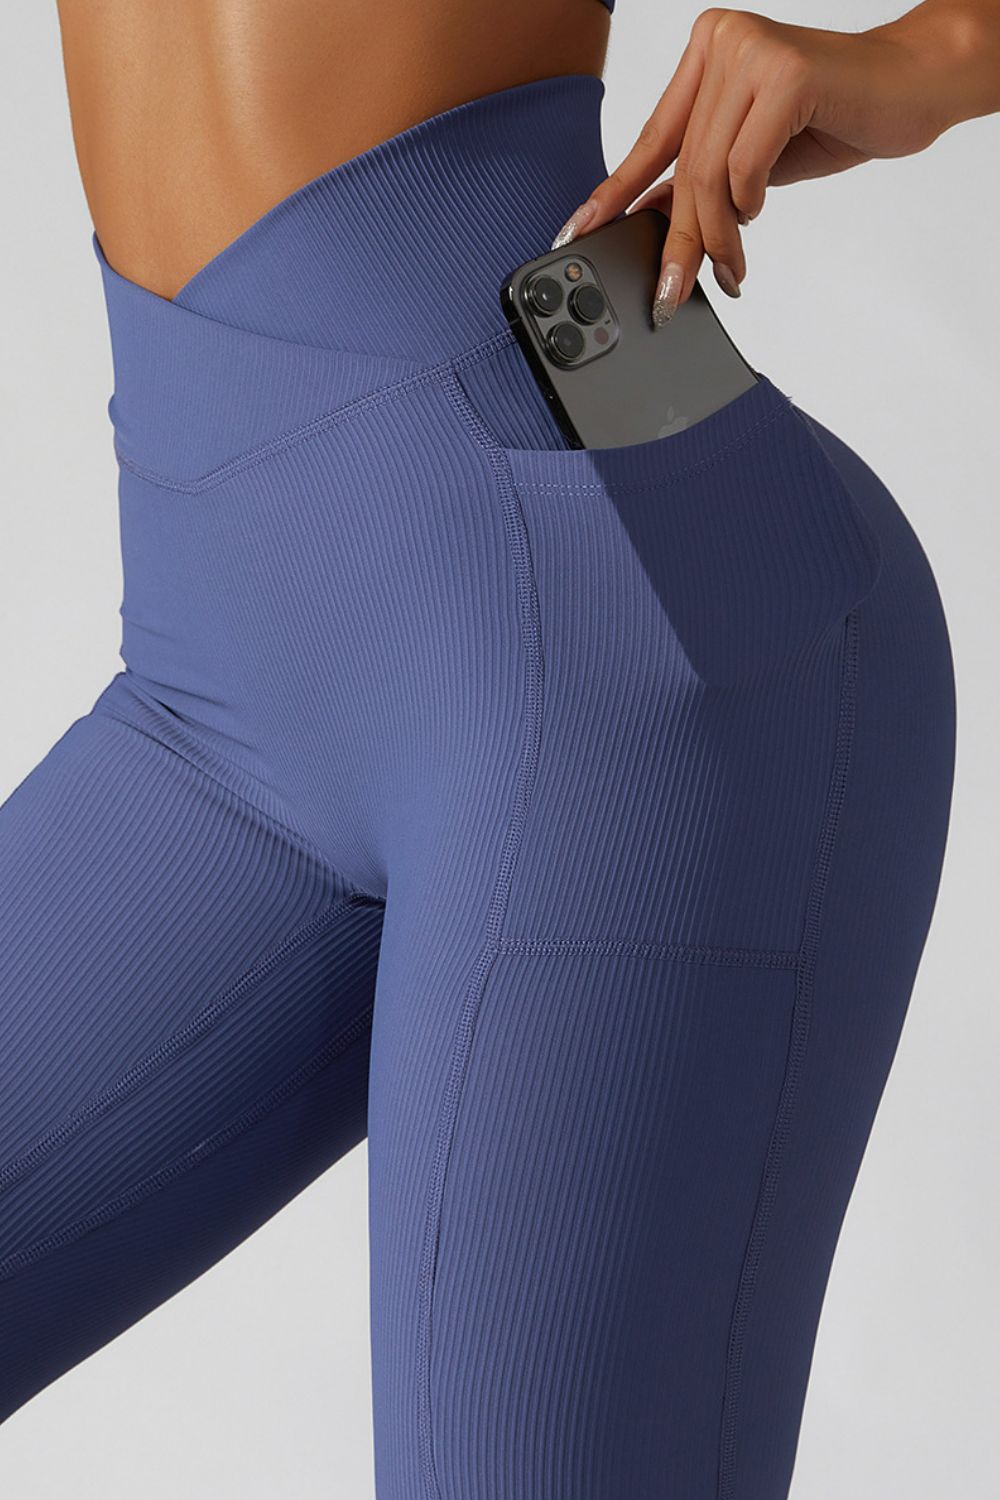 High-Waist Pocket Leggings with Crossover Detail Dusty Blue